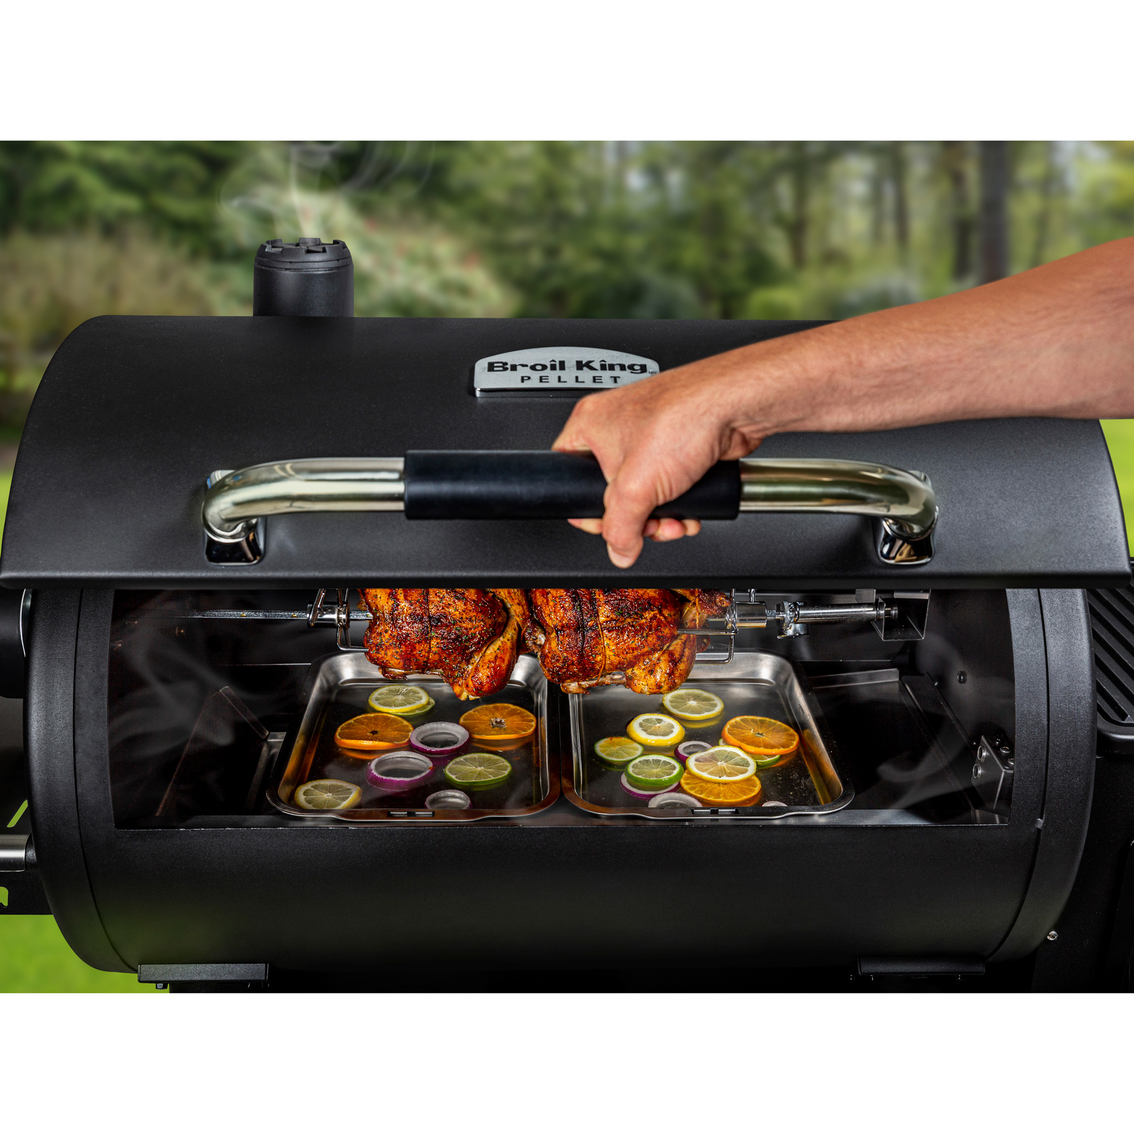 Broil King Regal WiFi Controlled Pellet 500 Grill - Image 7 of 10